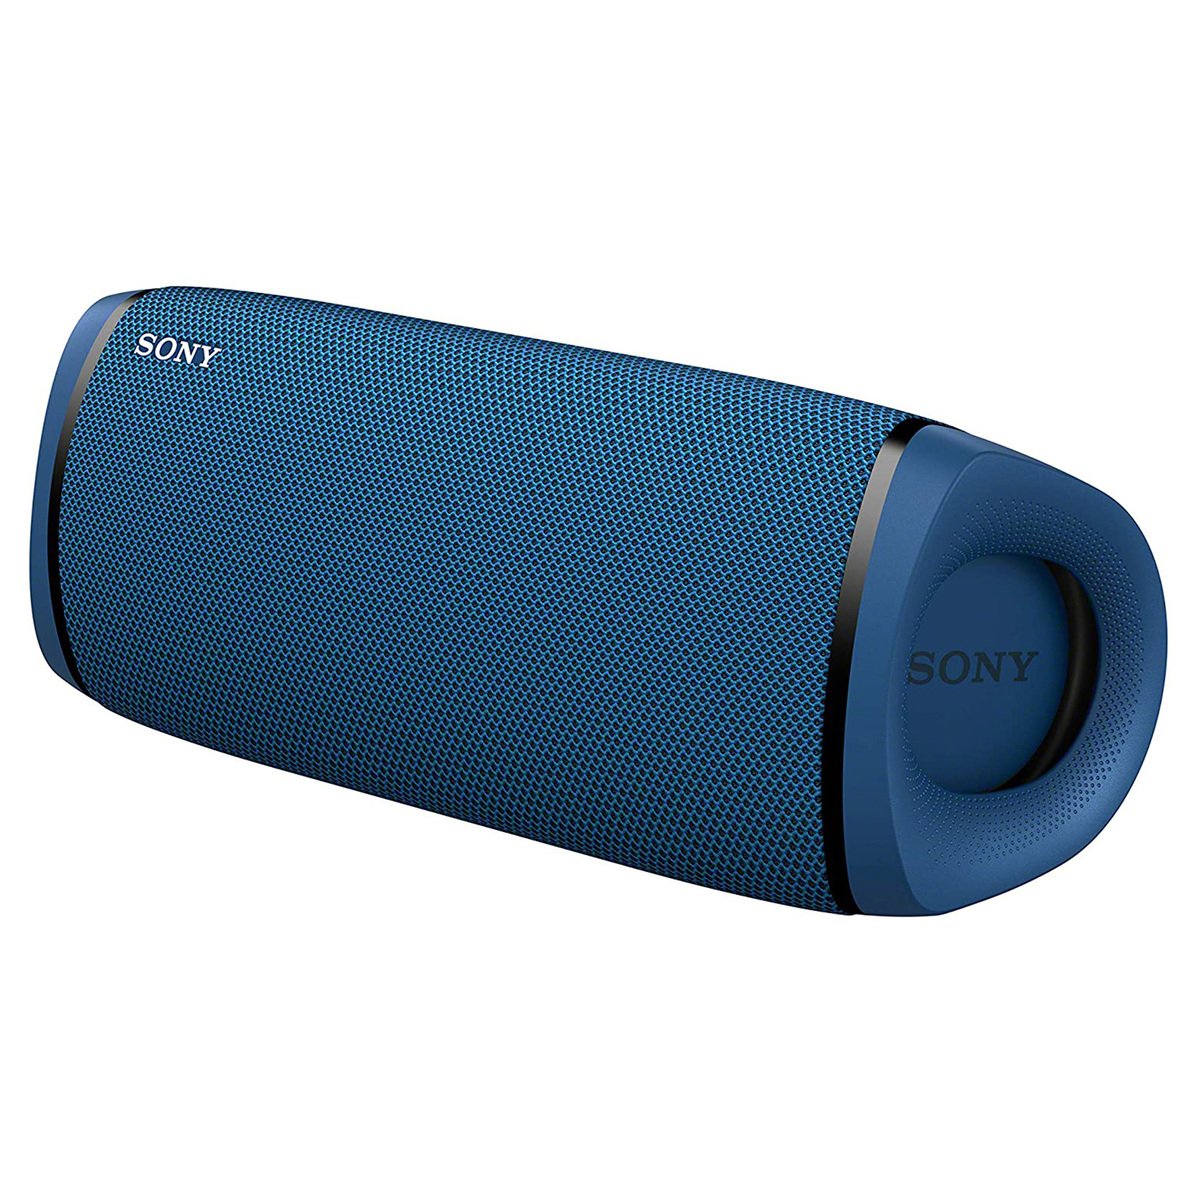 Sony SRS-XB43 EXTRA BASS Wireless Portable Speaker IP67 Waterproof Bluetooth and Built In Mic for Phone Calls, Blue